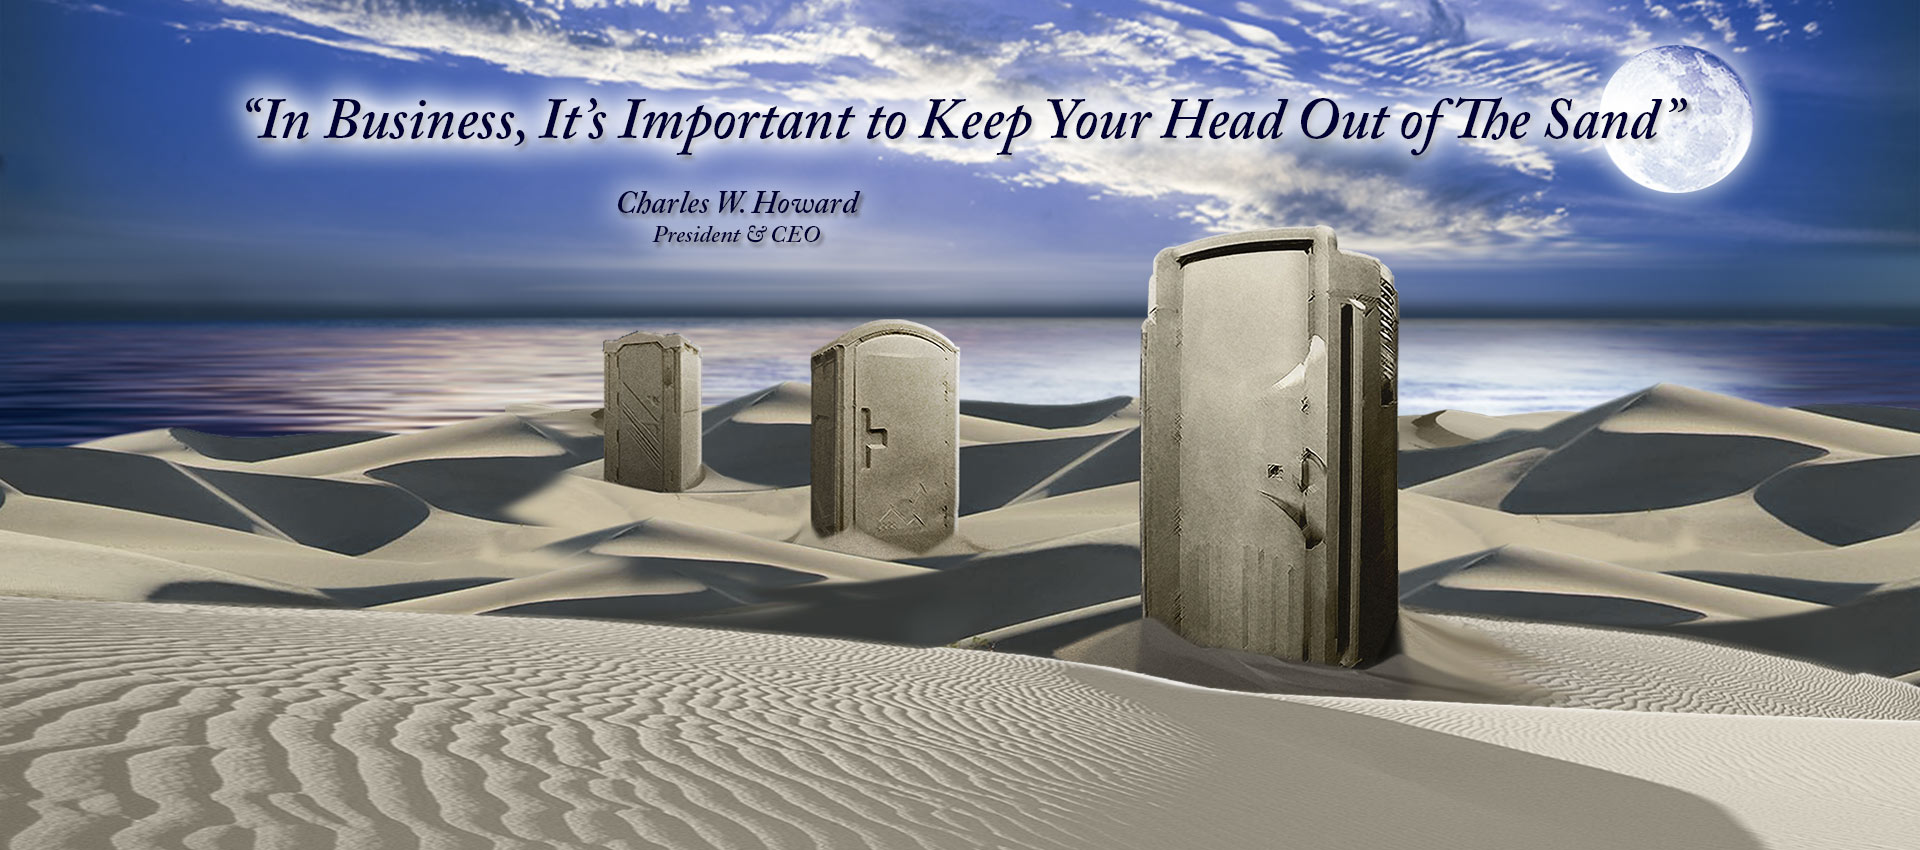 In Business, It's Important to Keep Your Head Out of the Sand- Charles W. Howard, President and CEO